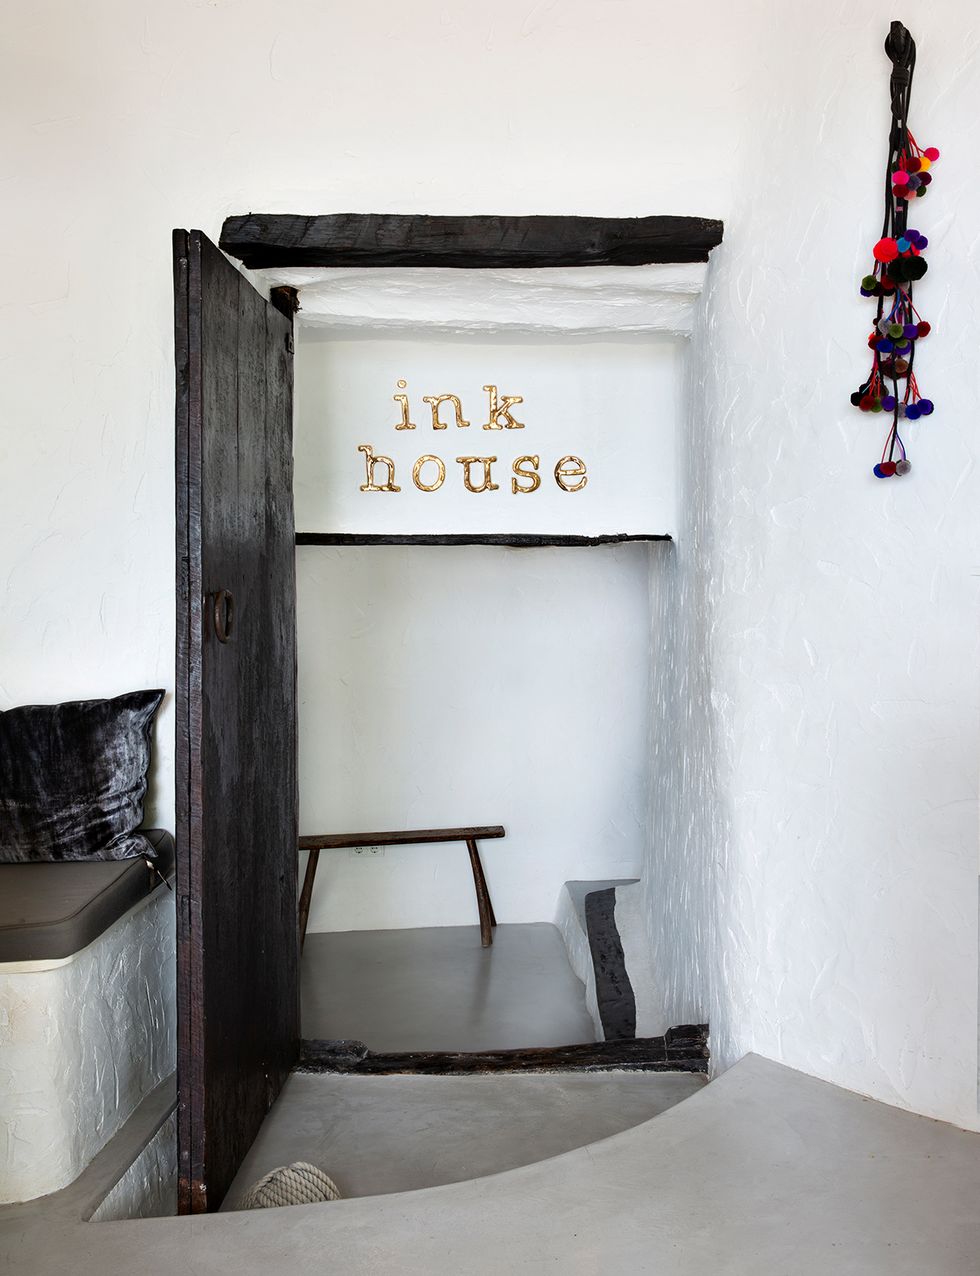 The Ink House in Ibiza